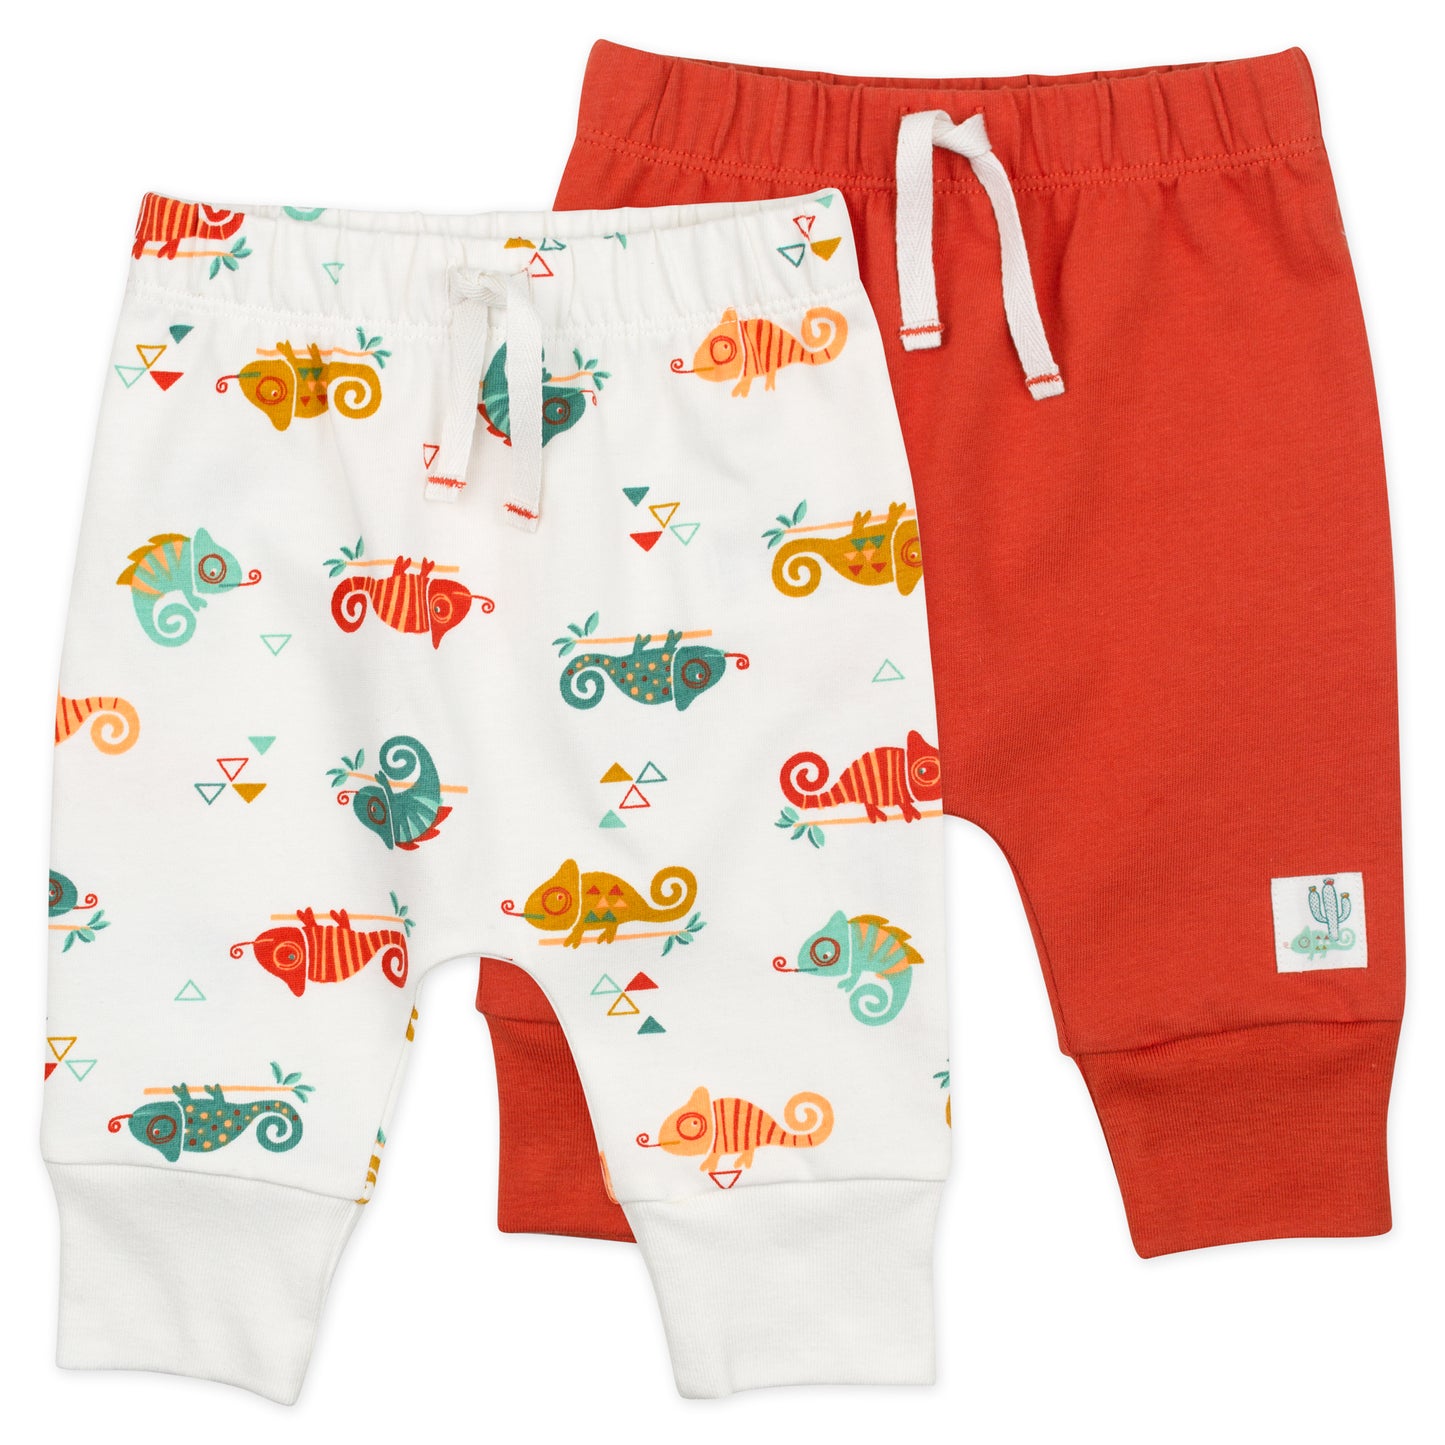 2-Pack Organic Cotton Pant in Chameleon Print